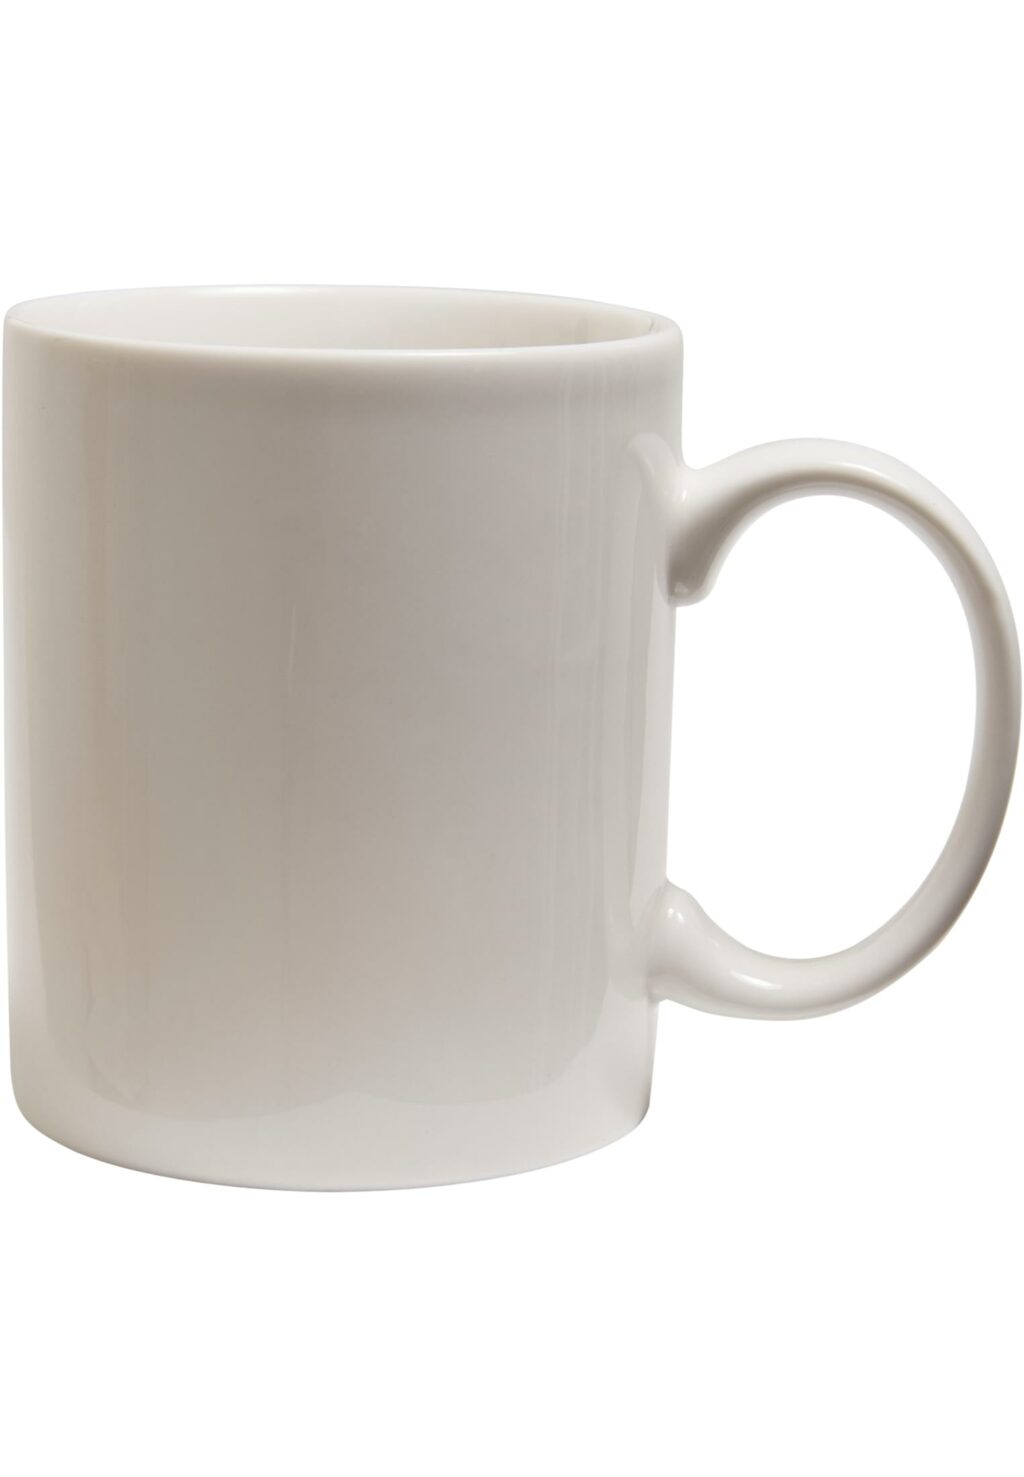 Don´t Work Here Cup white one MT2292